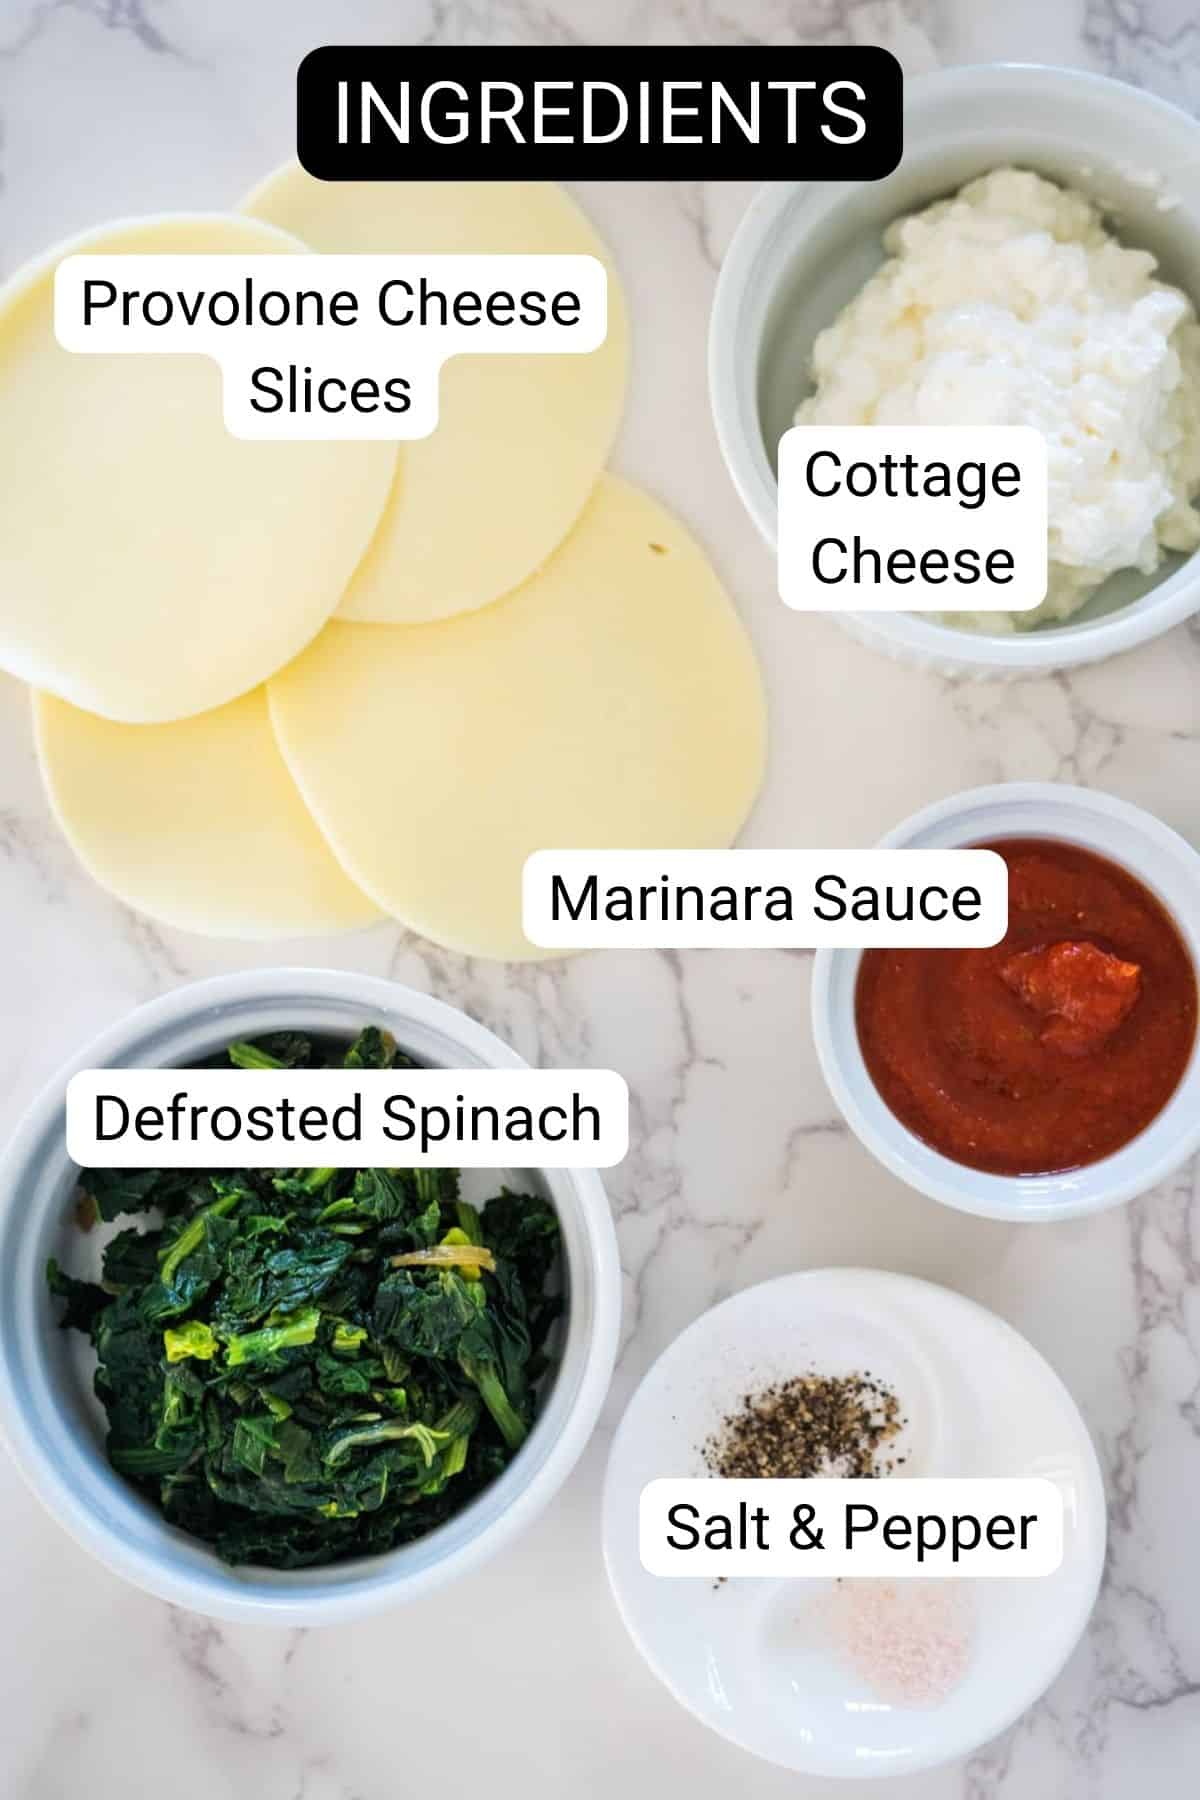 Ingredients for a recipe displayed: provolone slices, cottage cheese, marinara sauce, defrosted spinach, and salt & pepper, all in separate bowls on a marble countertop.